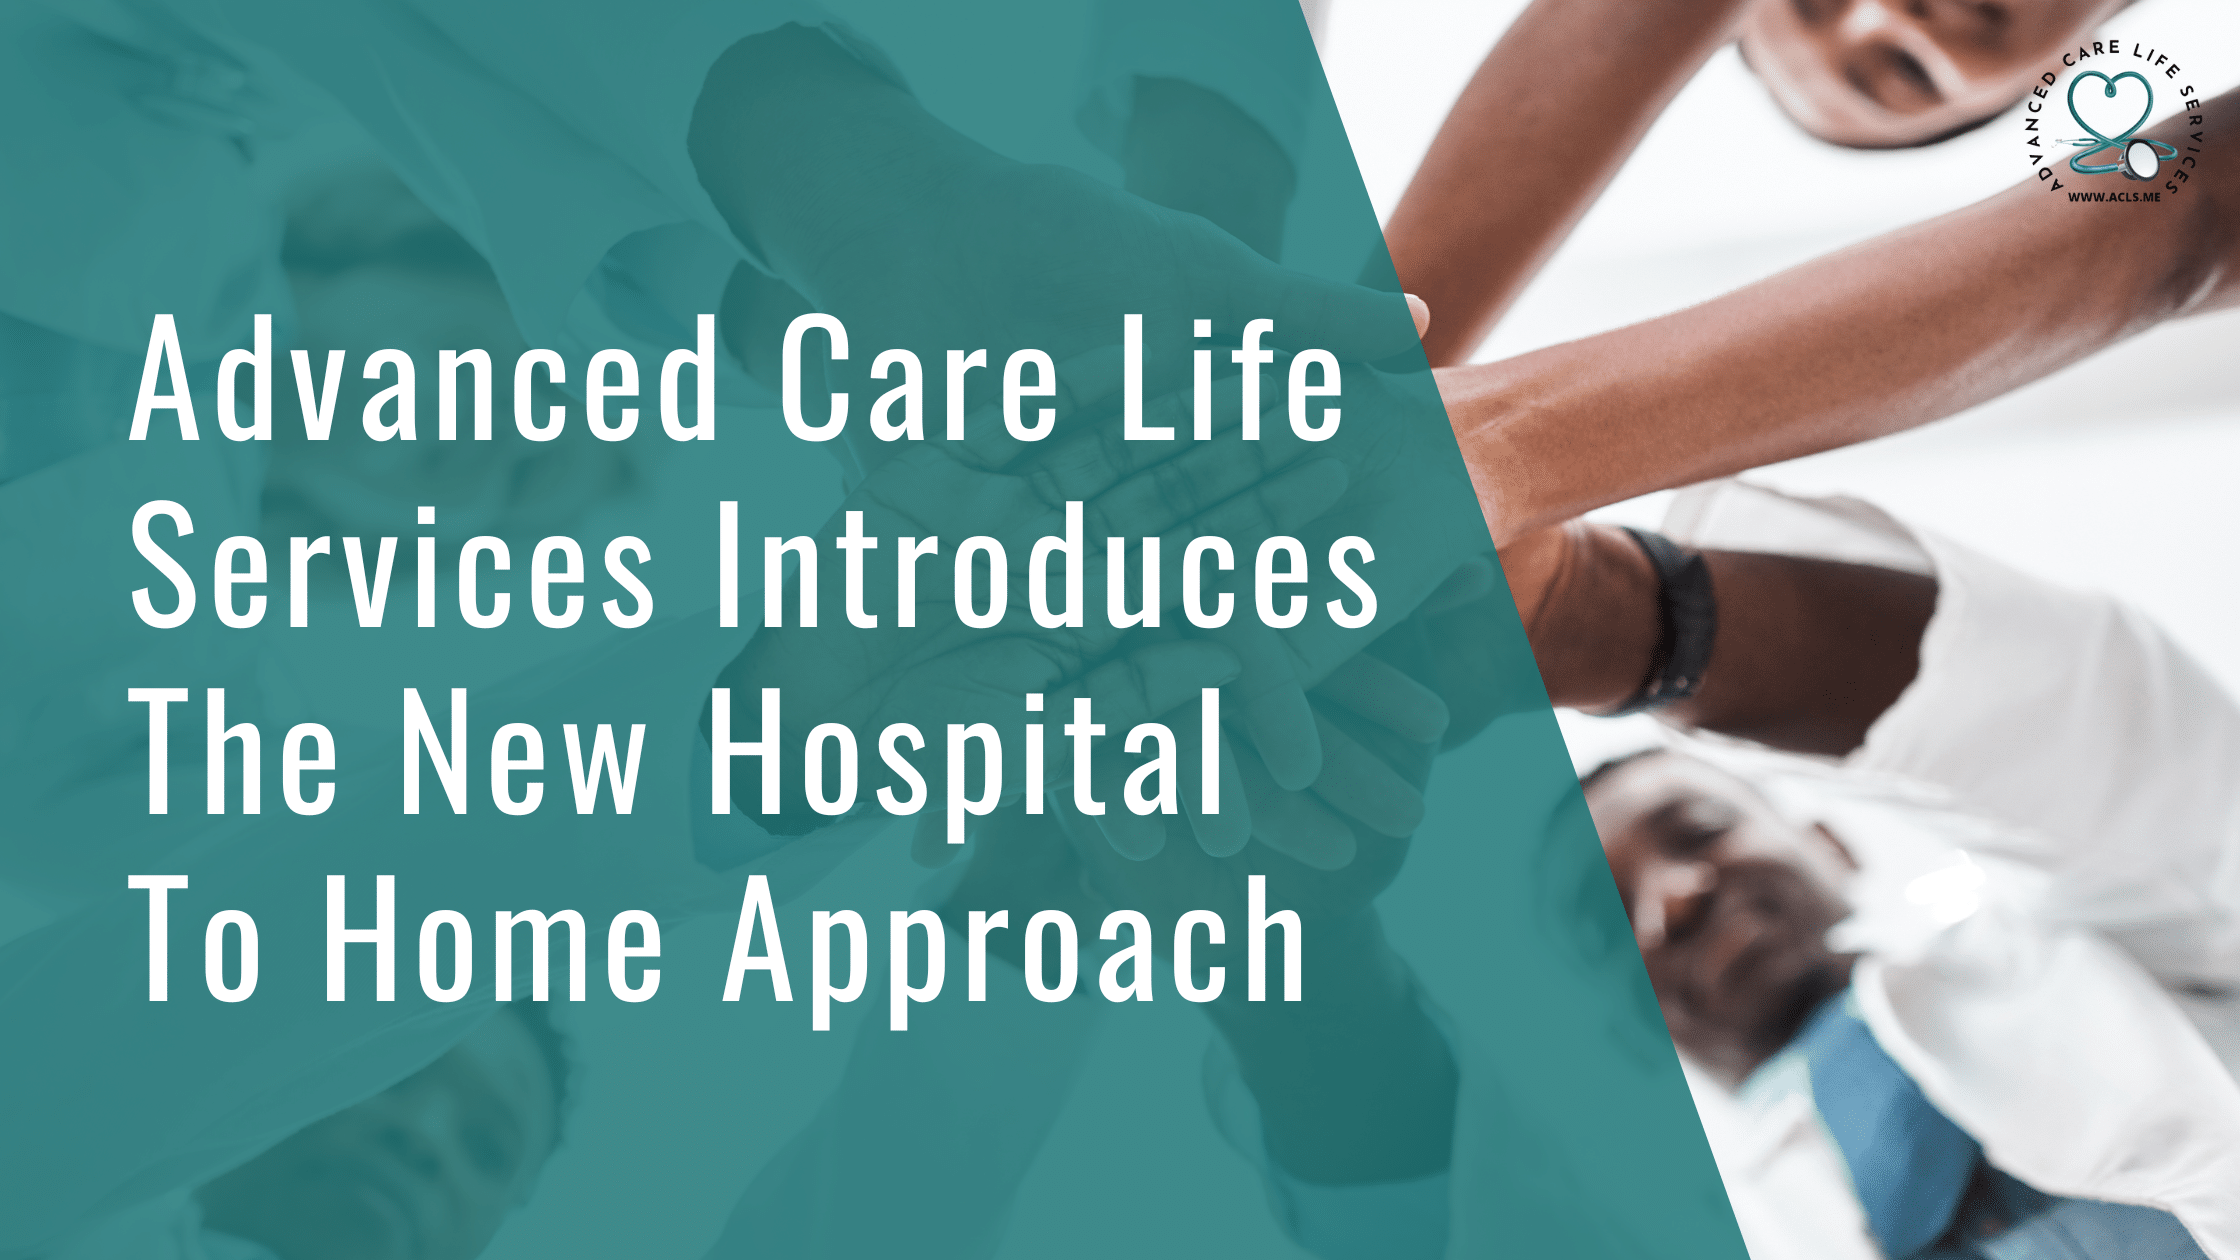 Advanced Care Life Services Introduces the New Hospital To Home Approach